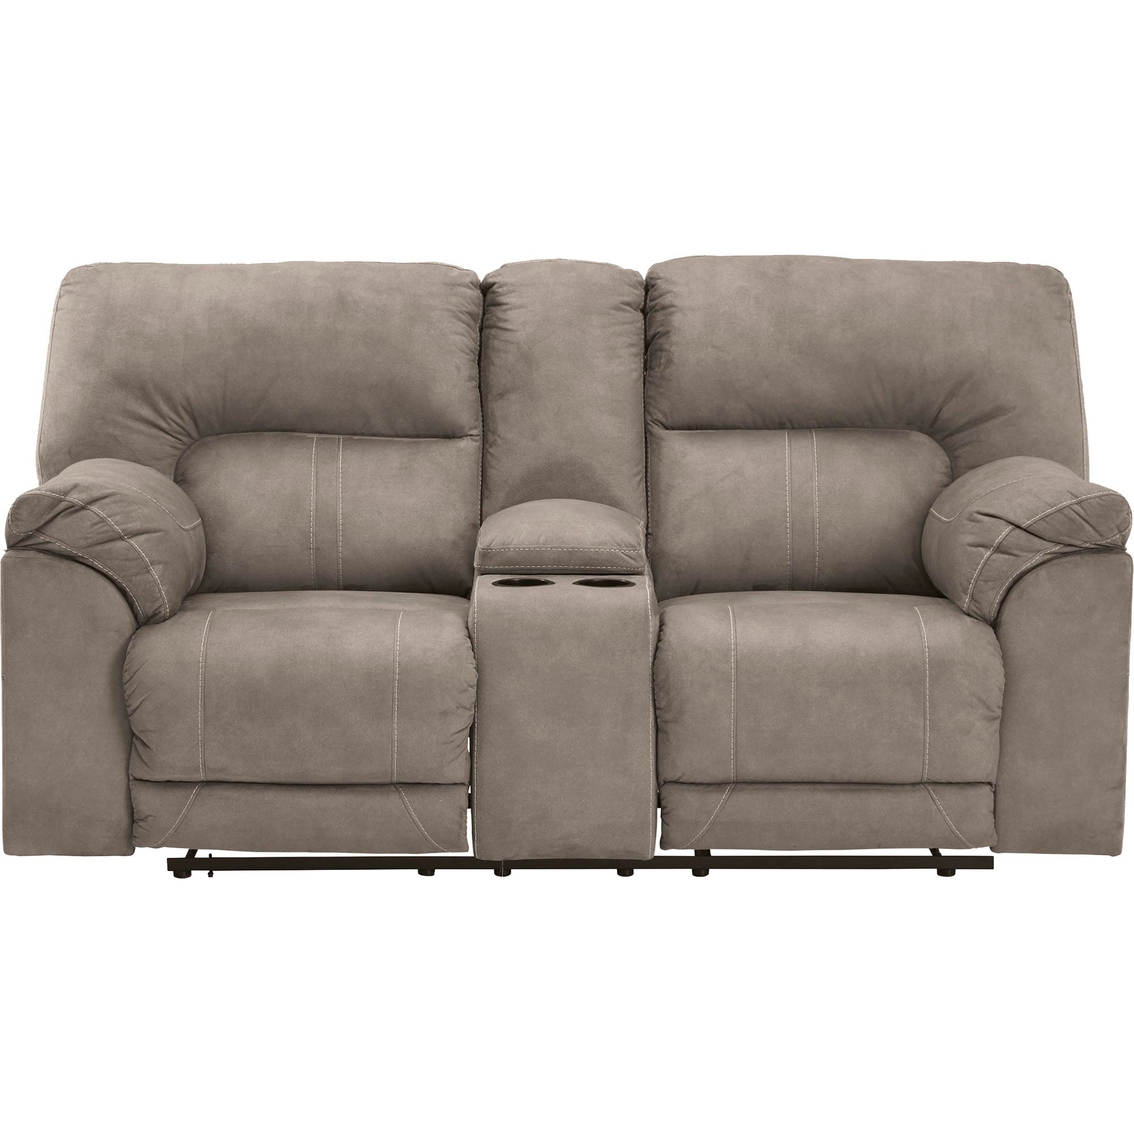 Signature Design by Ashley Cavalcade Power Reclining 4 pc. Sectional with Recliner - Image 5 of 9